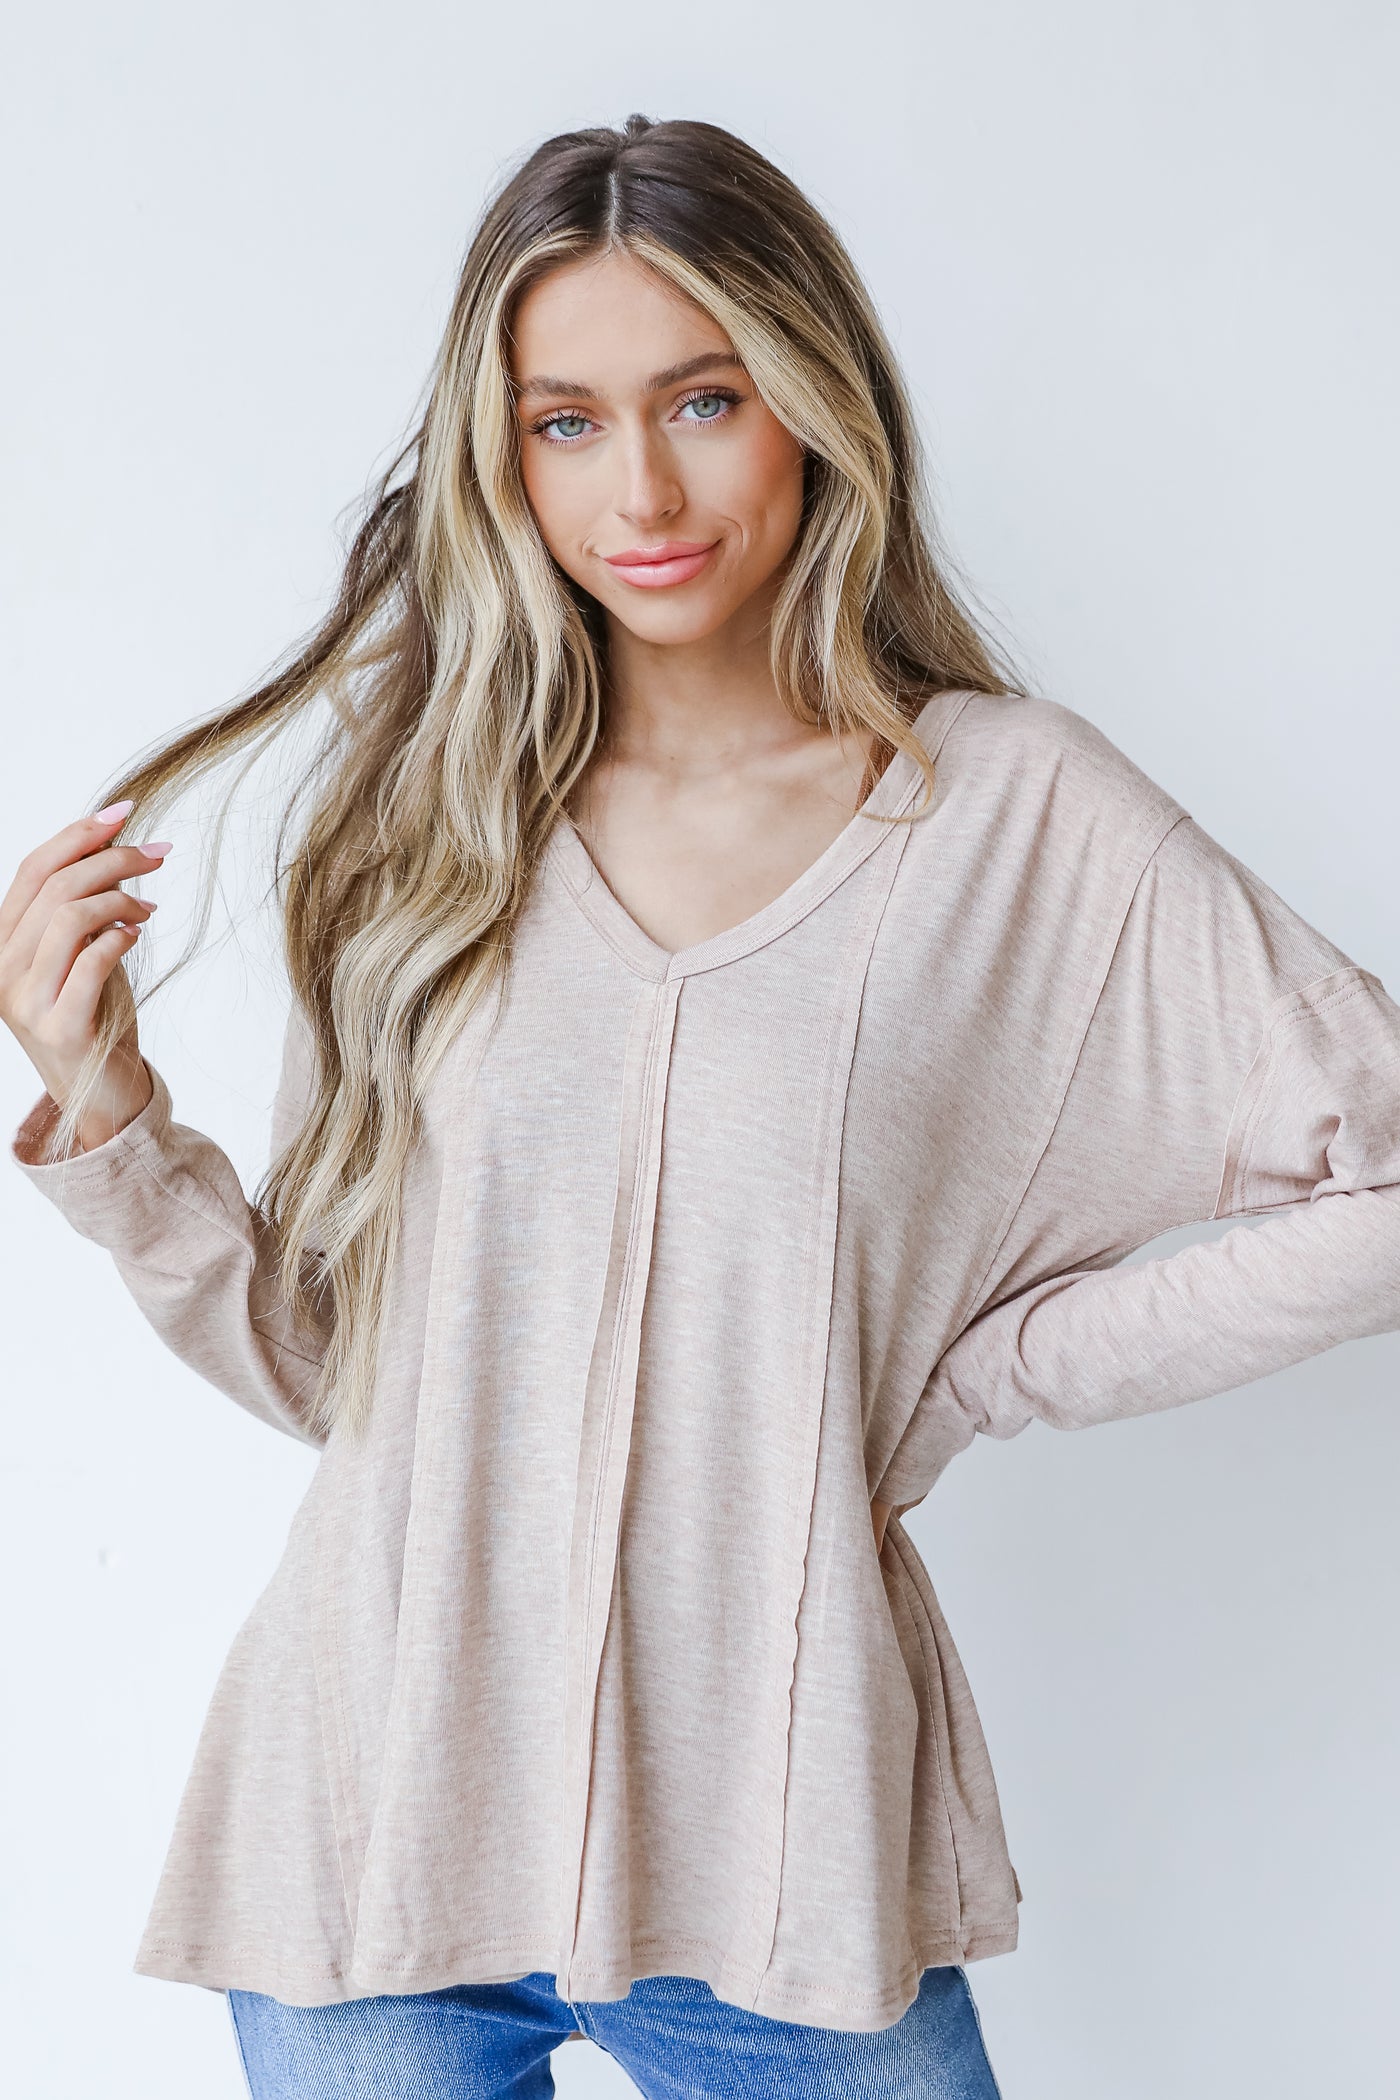 Jersey Knit Top in taupe front view